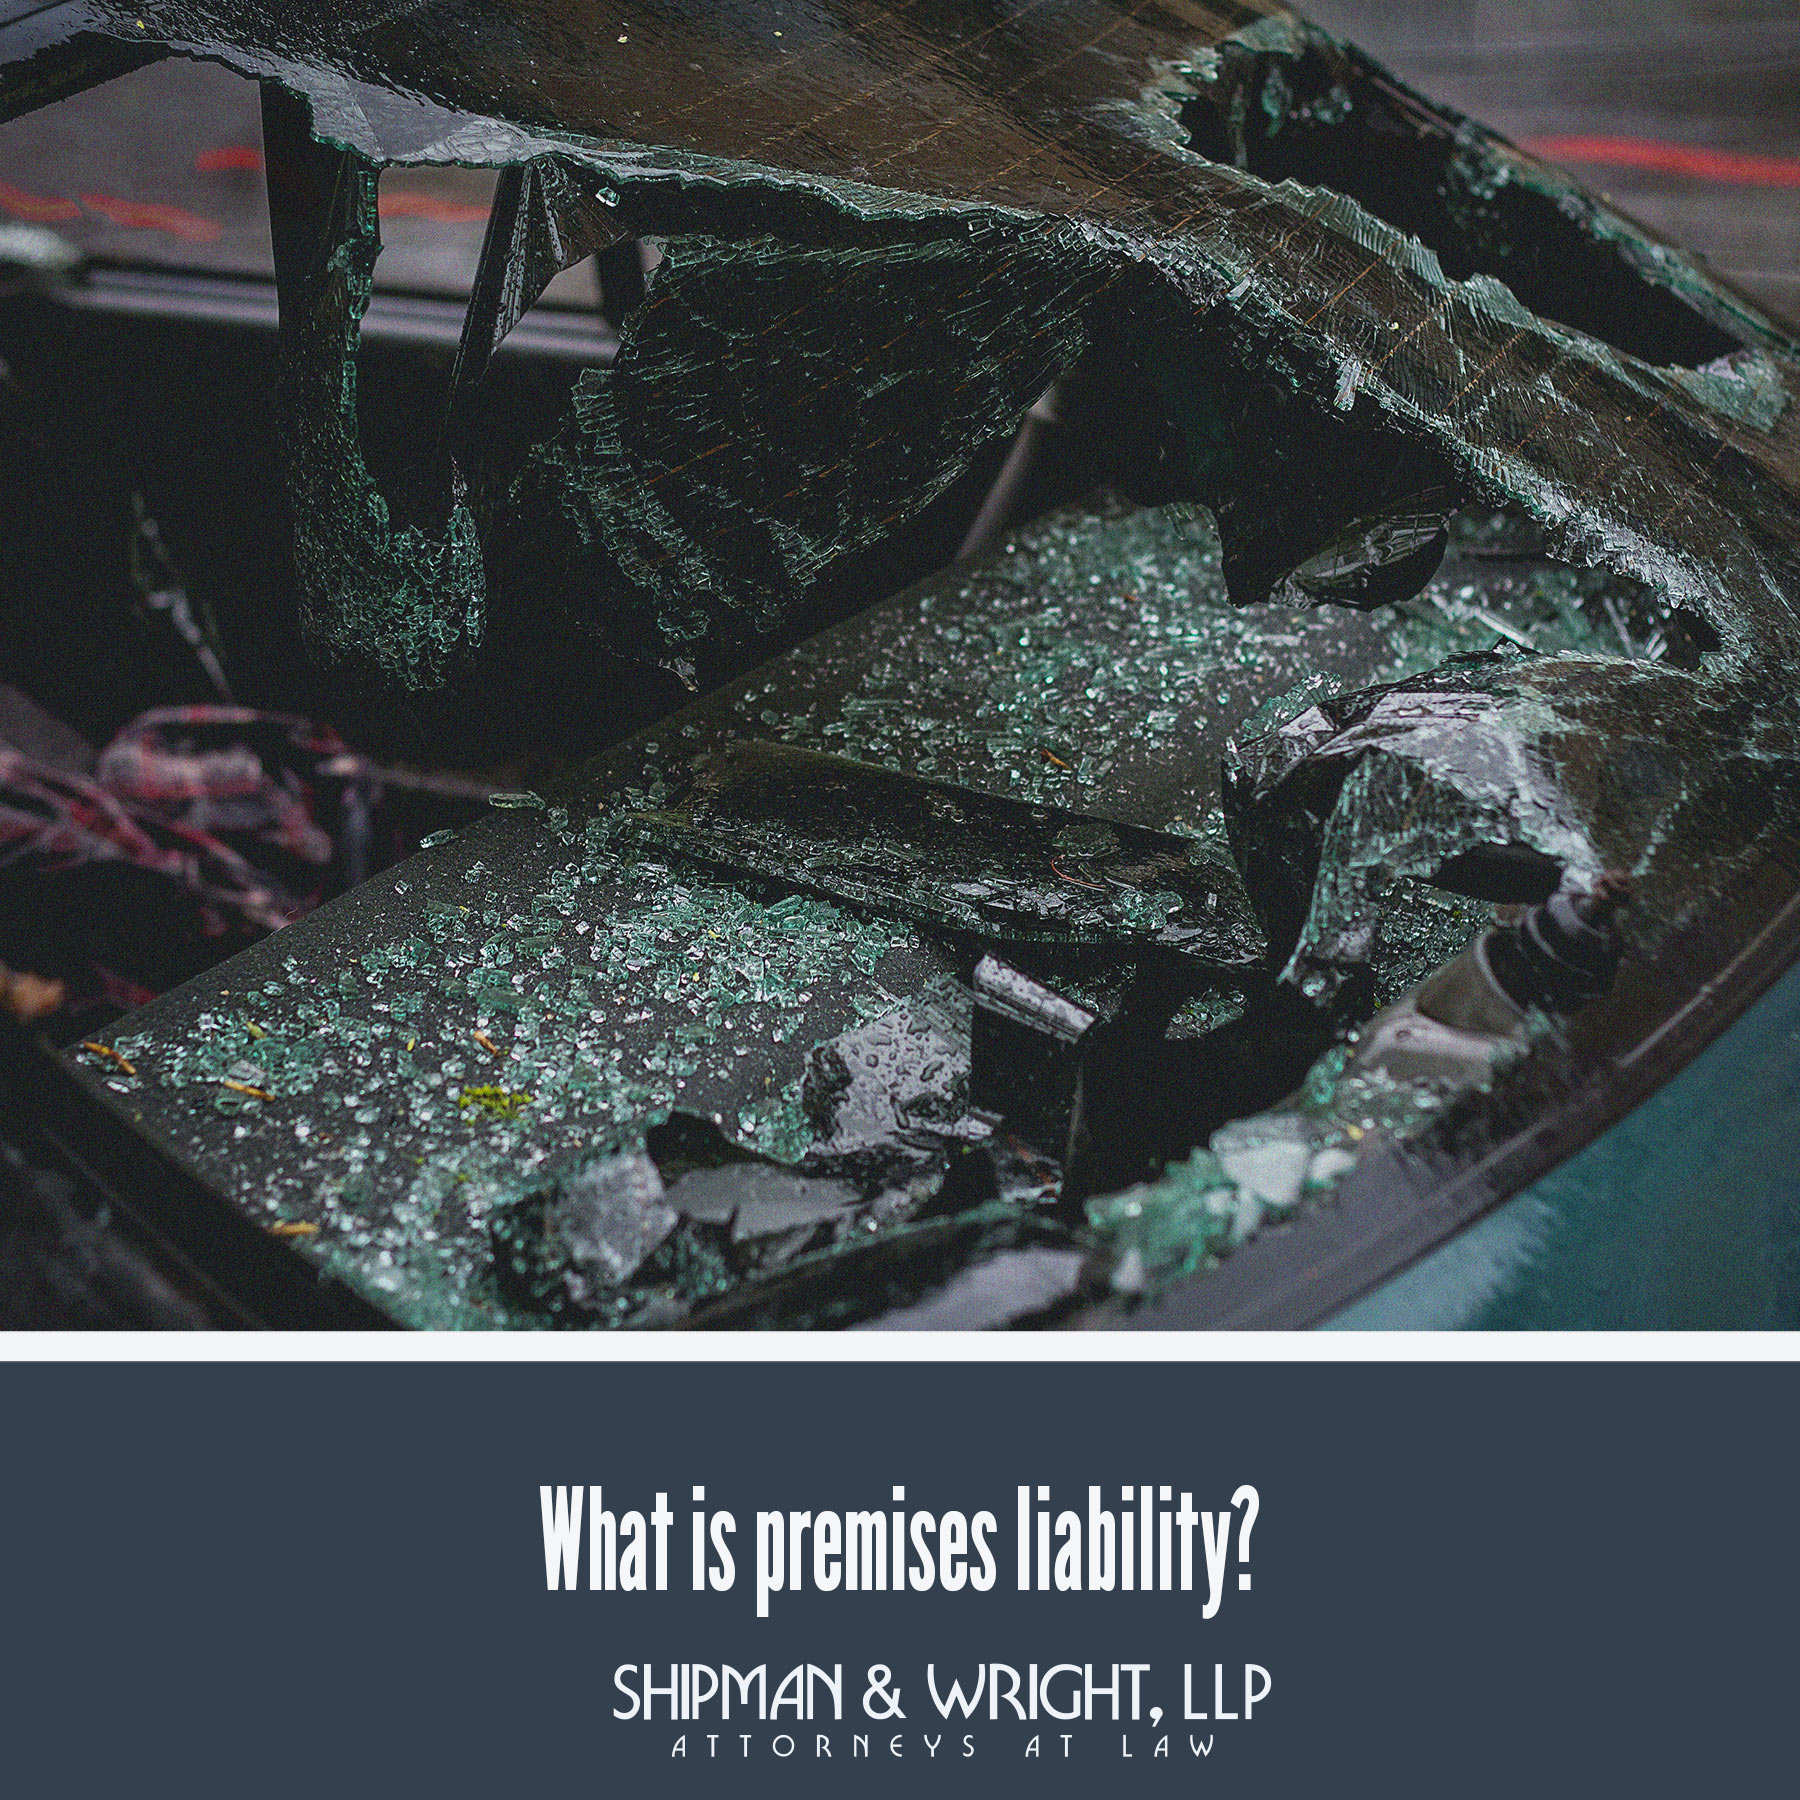 Premises liability in personal injury law refers to the legal obligation of a property owner or possessor to ensure that their property is safe for those who come onto it.